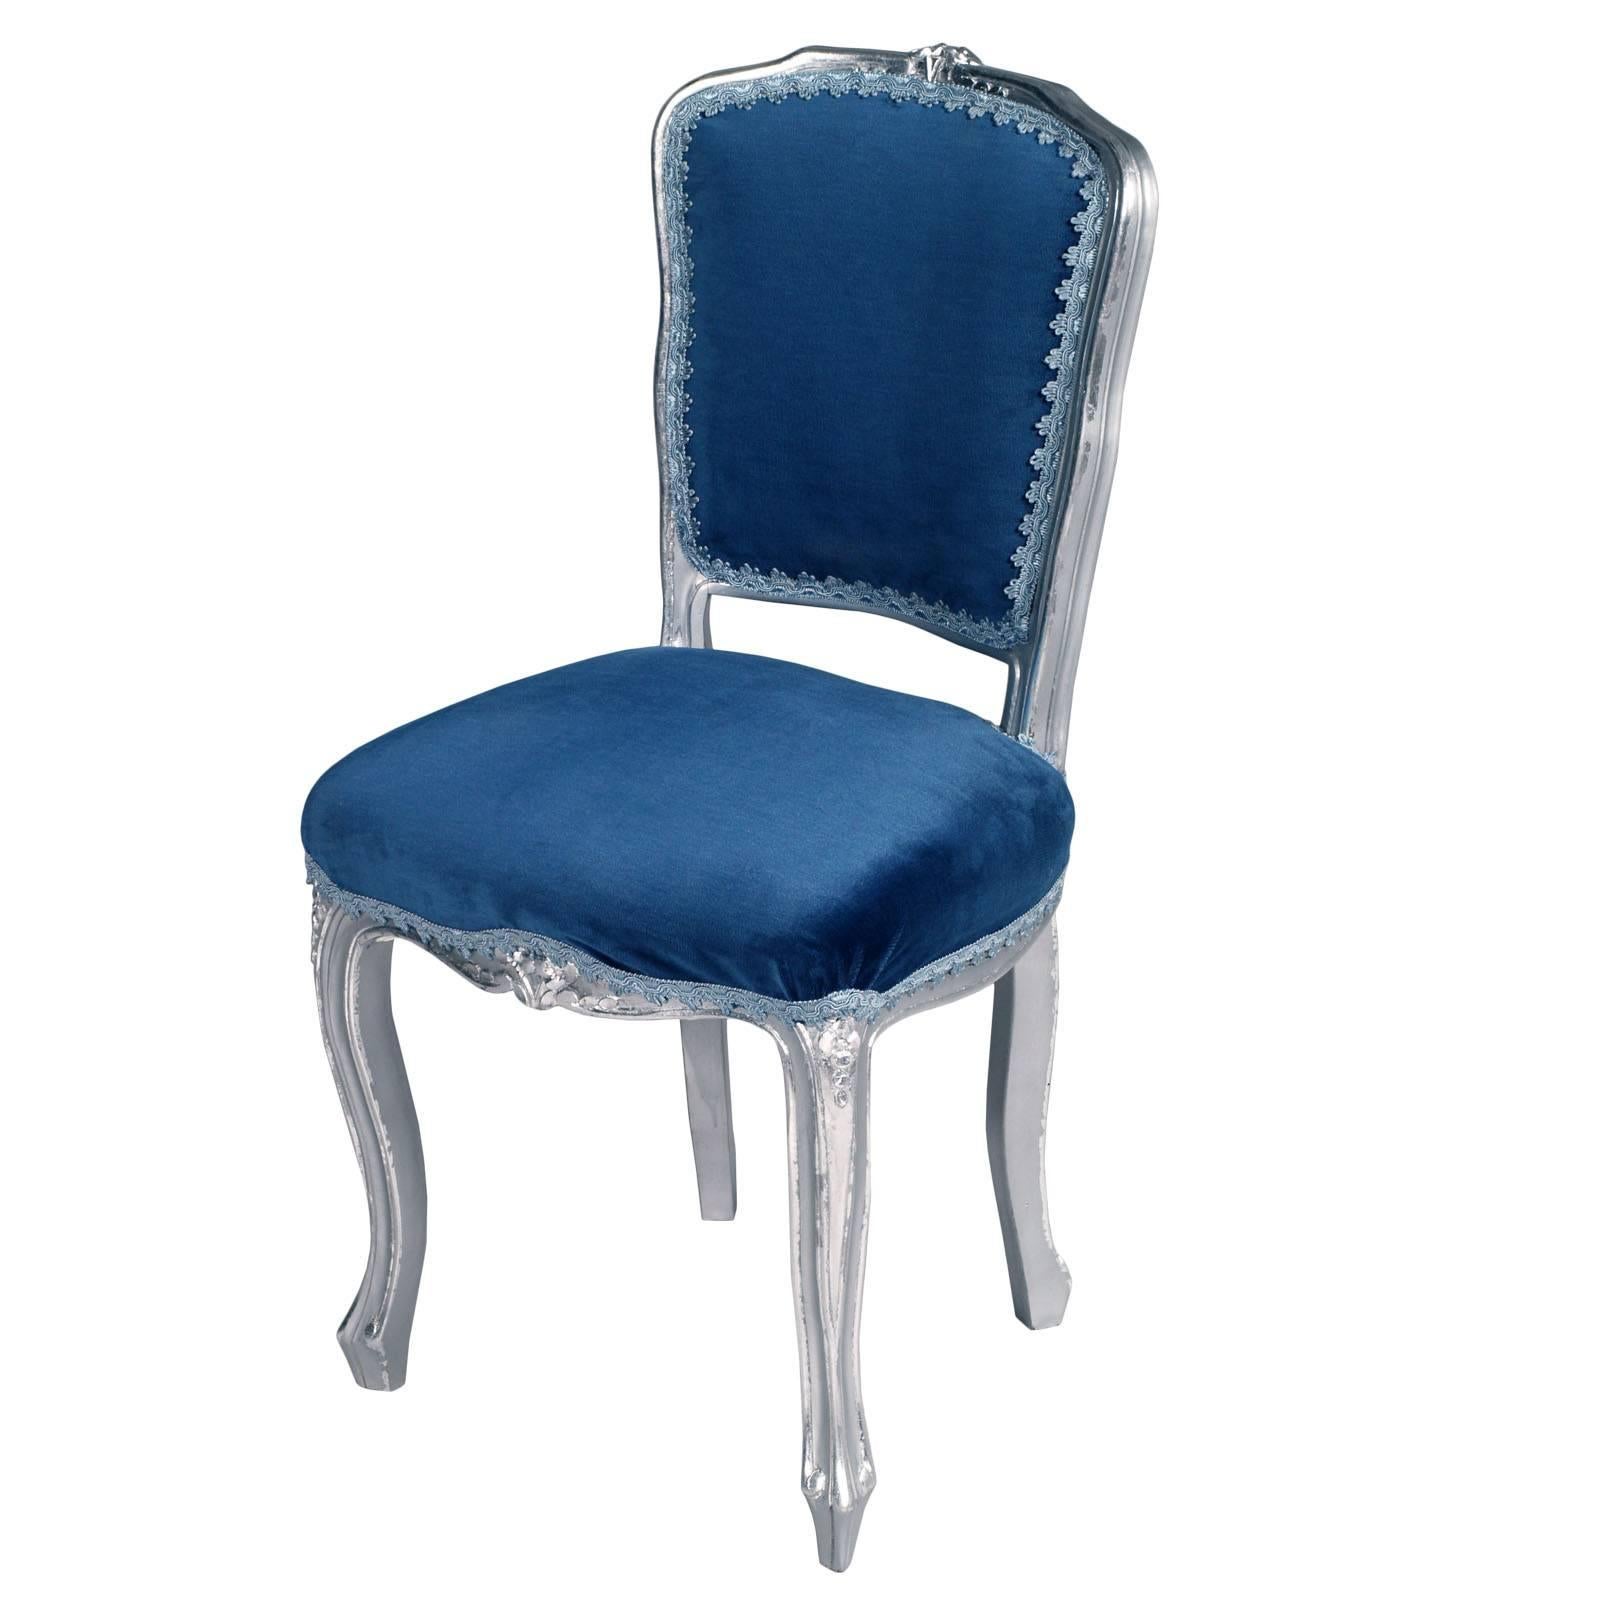 Code: FA41
Elegant Venetian Baroque side chairs in walnut hand-carved and silvered with new blue velvet upholstery.